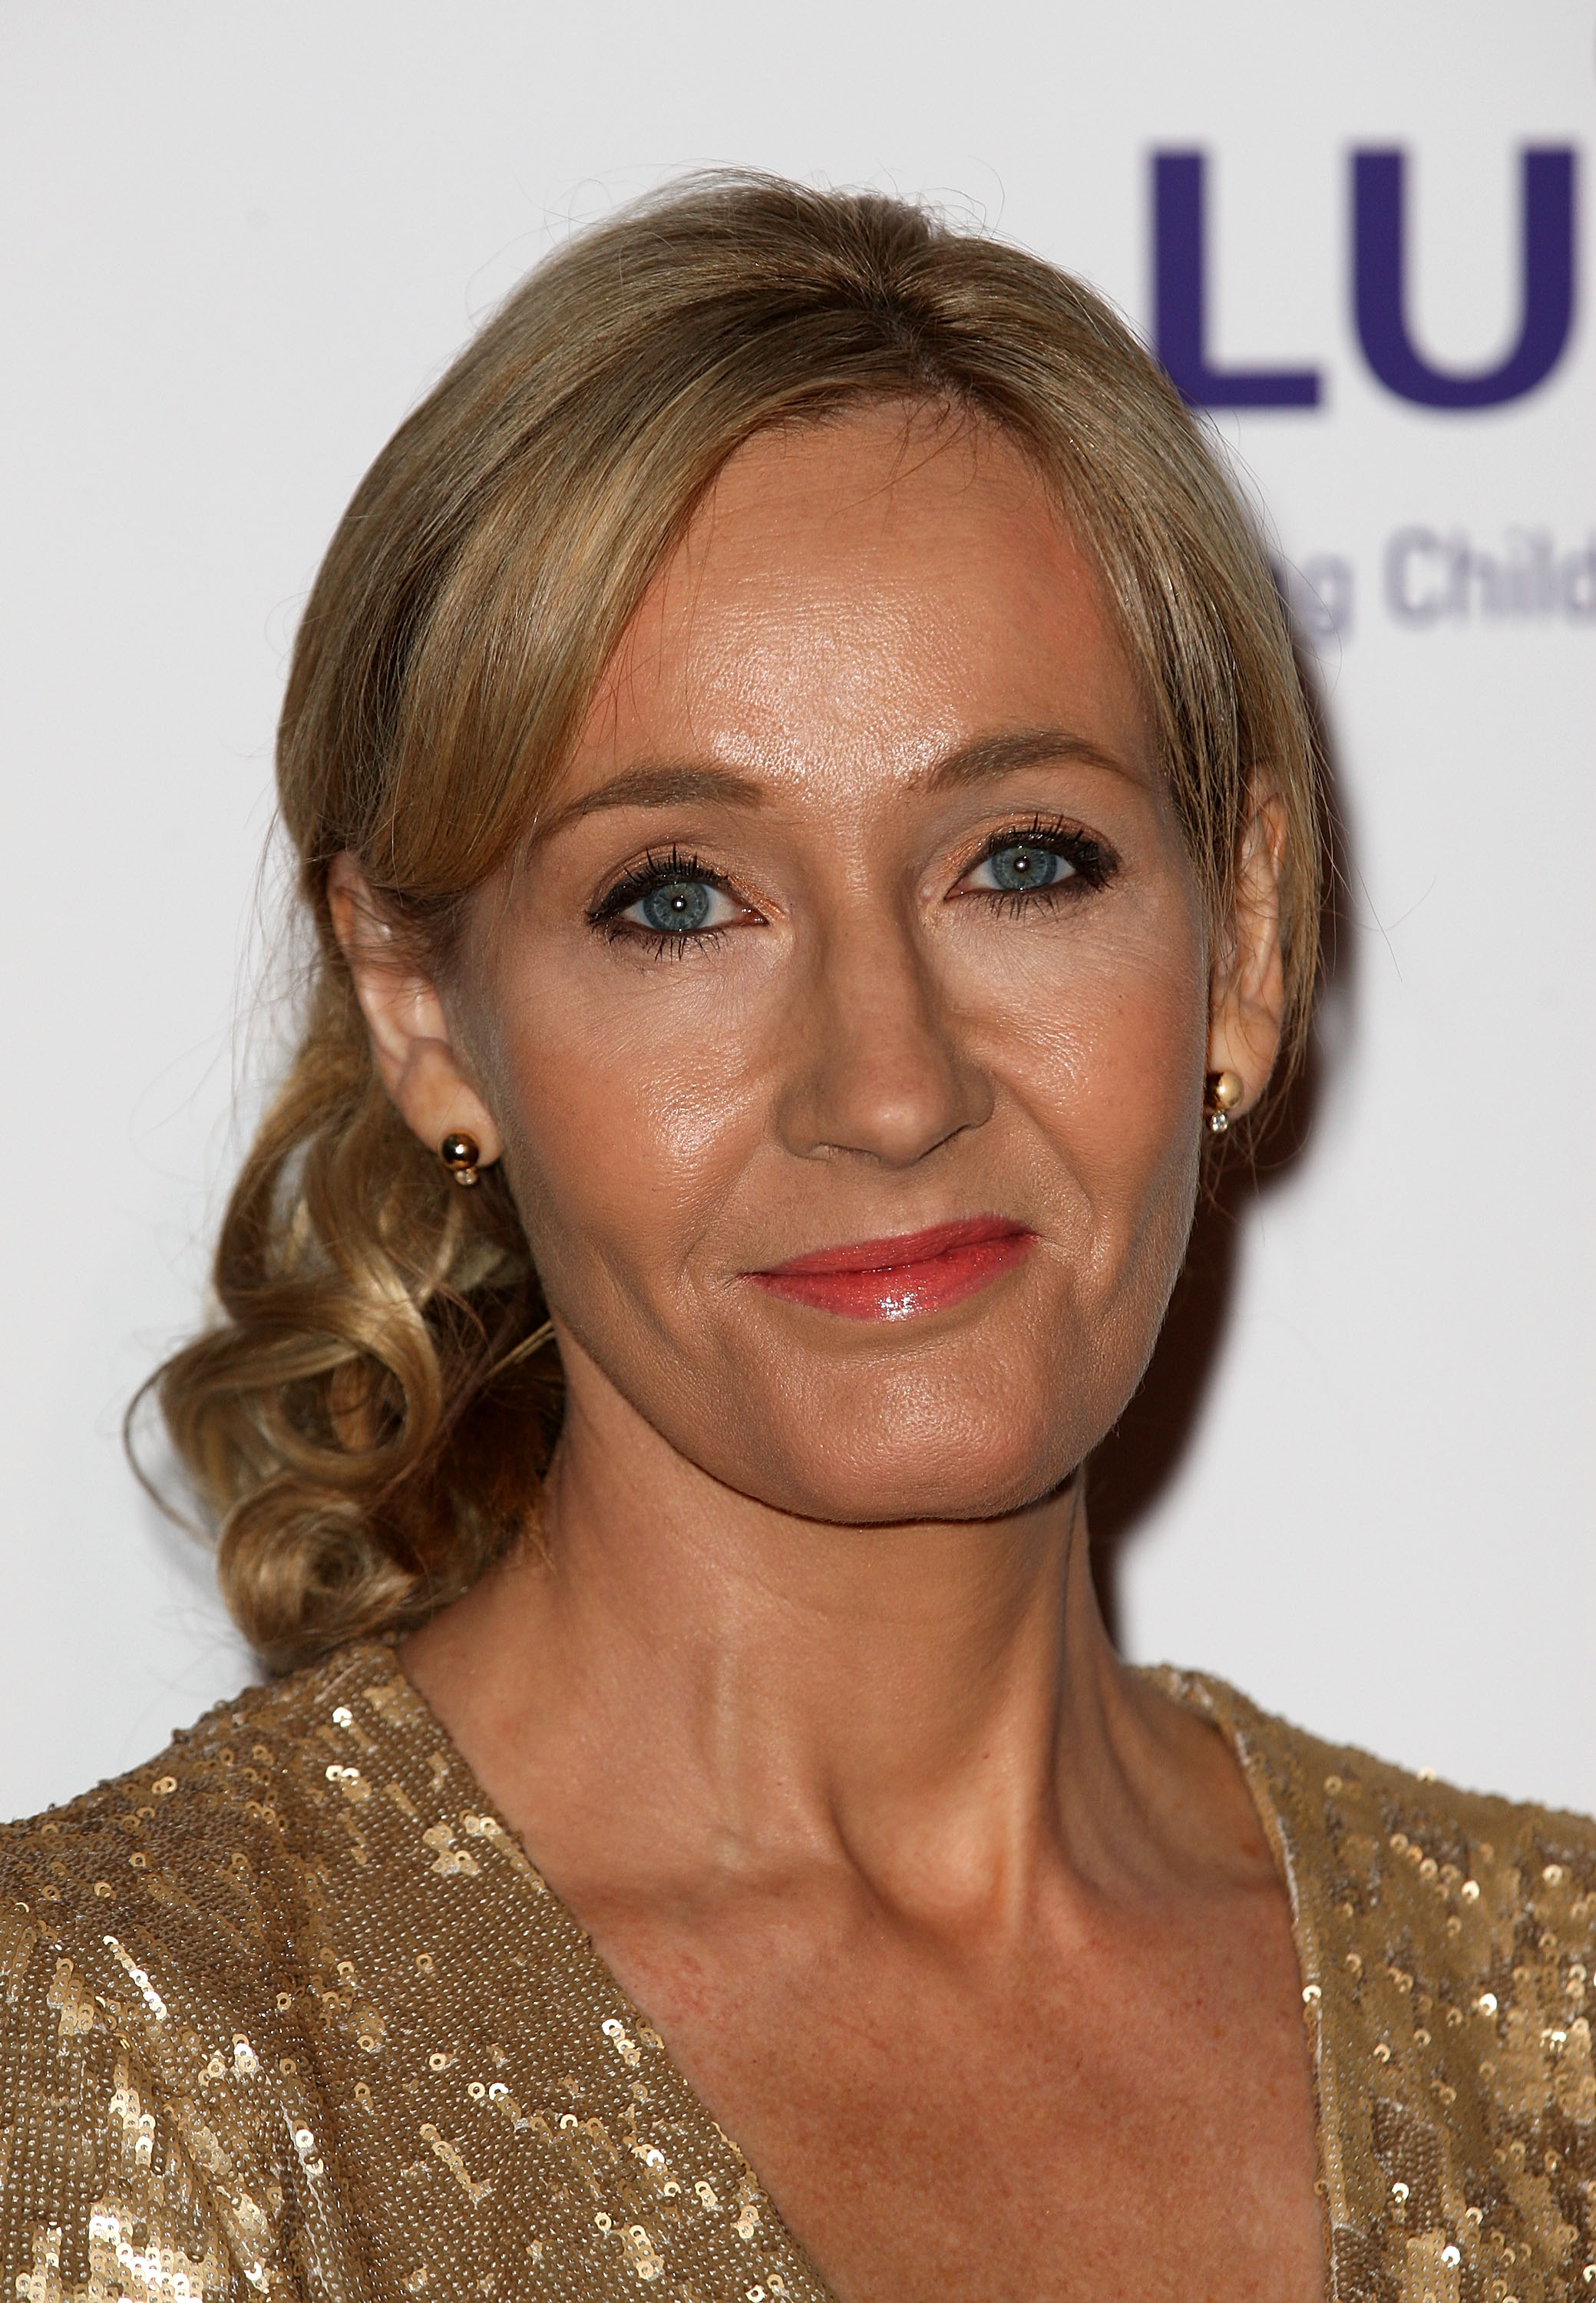 Joanne "JK" Rowling attends a charity evening hosted by JK Rowling to raise funds for 'Lumos' a charity helping to reunite children in care with their families in Eastern Europe at Warner Bros Studios on November 9, 2013 in London, England. (Danny E. Martindale—Getty Images)